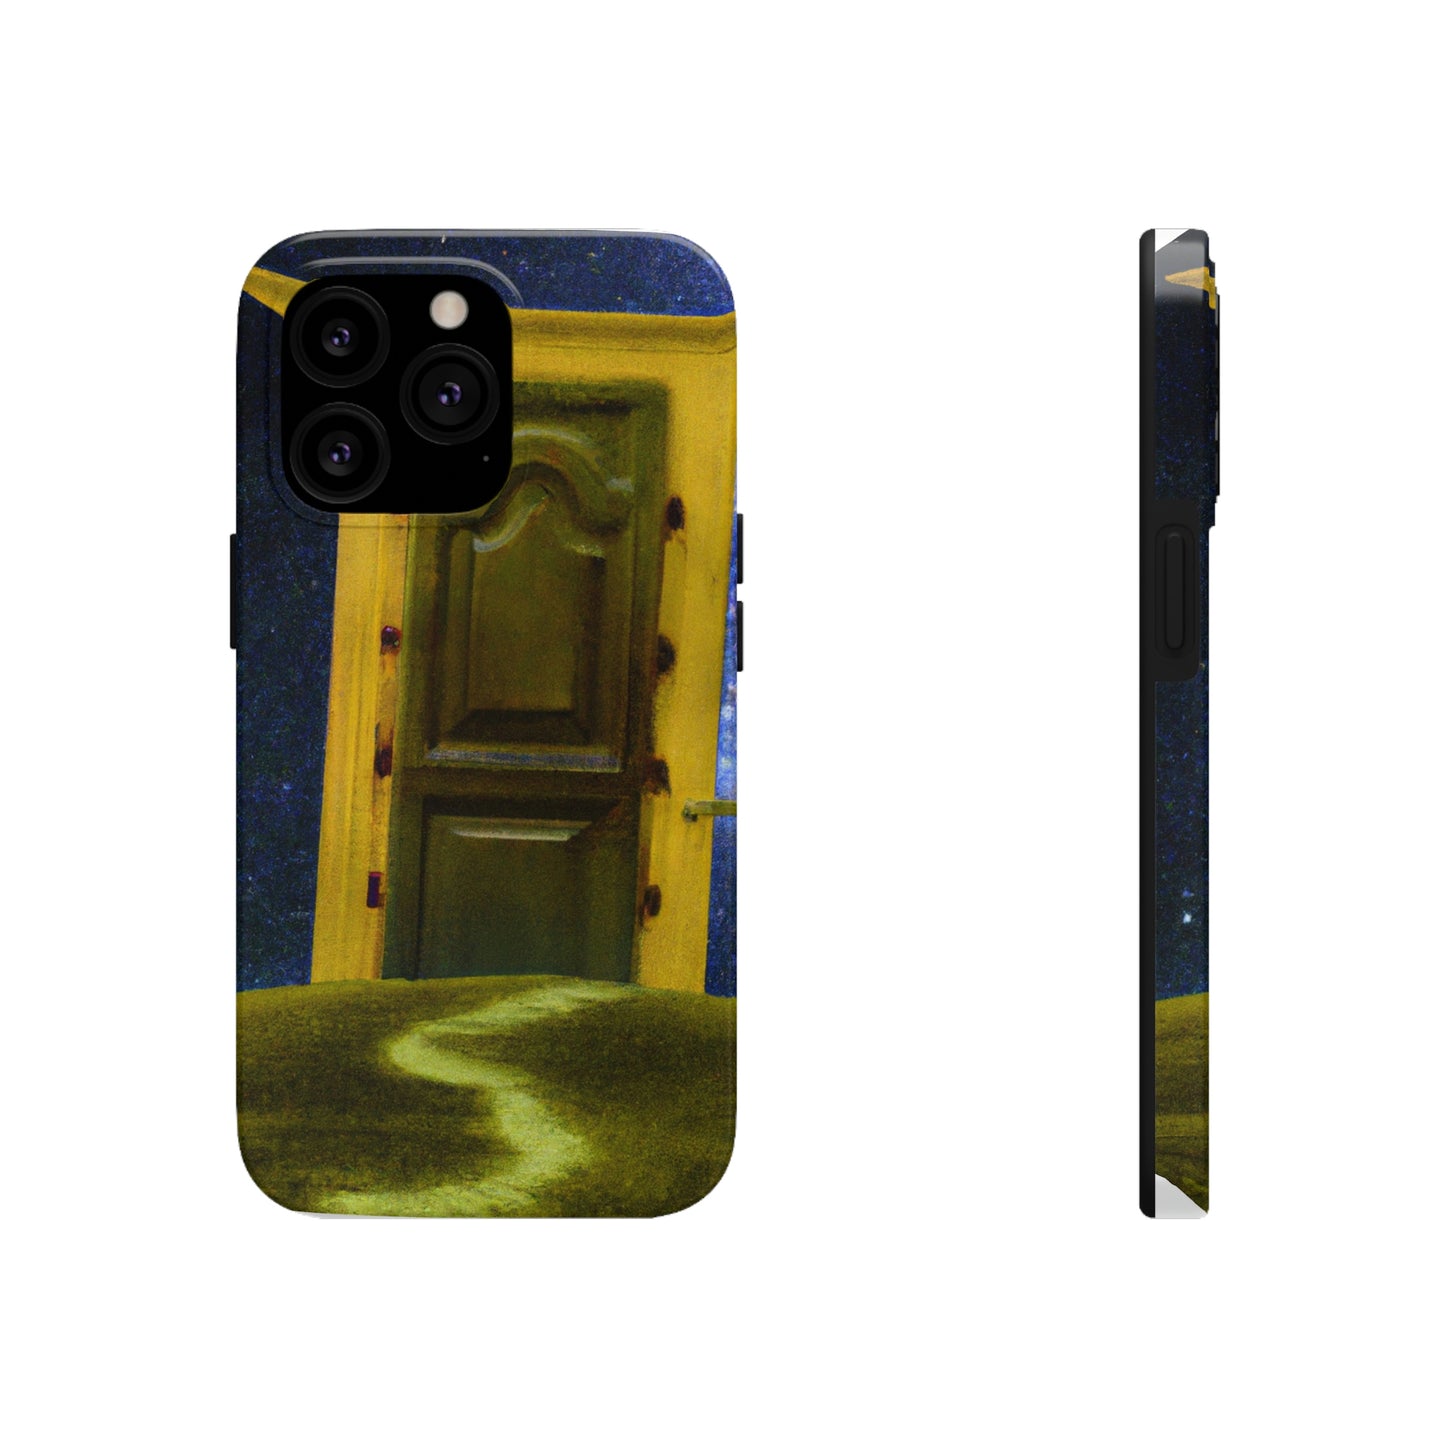 The Heavenly Threshold - The Alien Tough Phone Cases